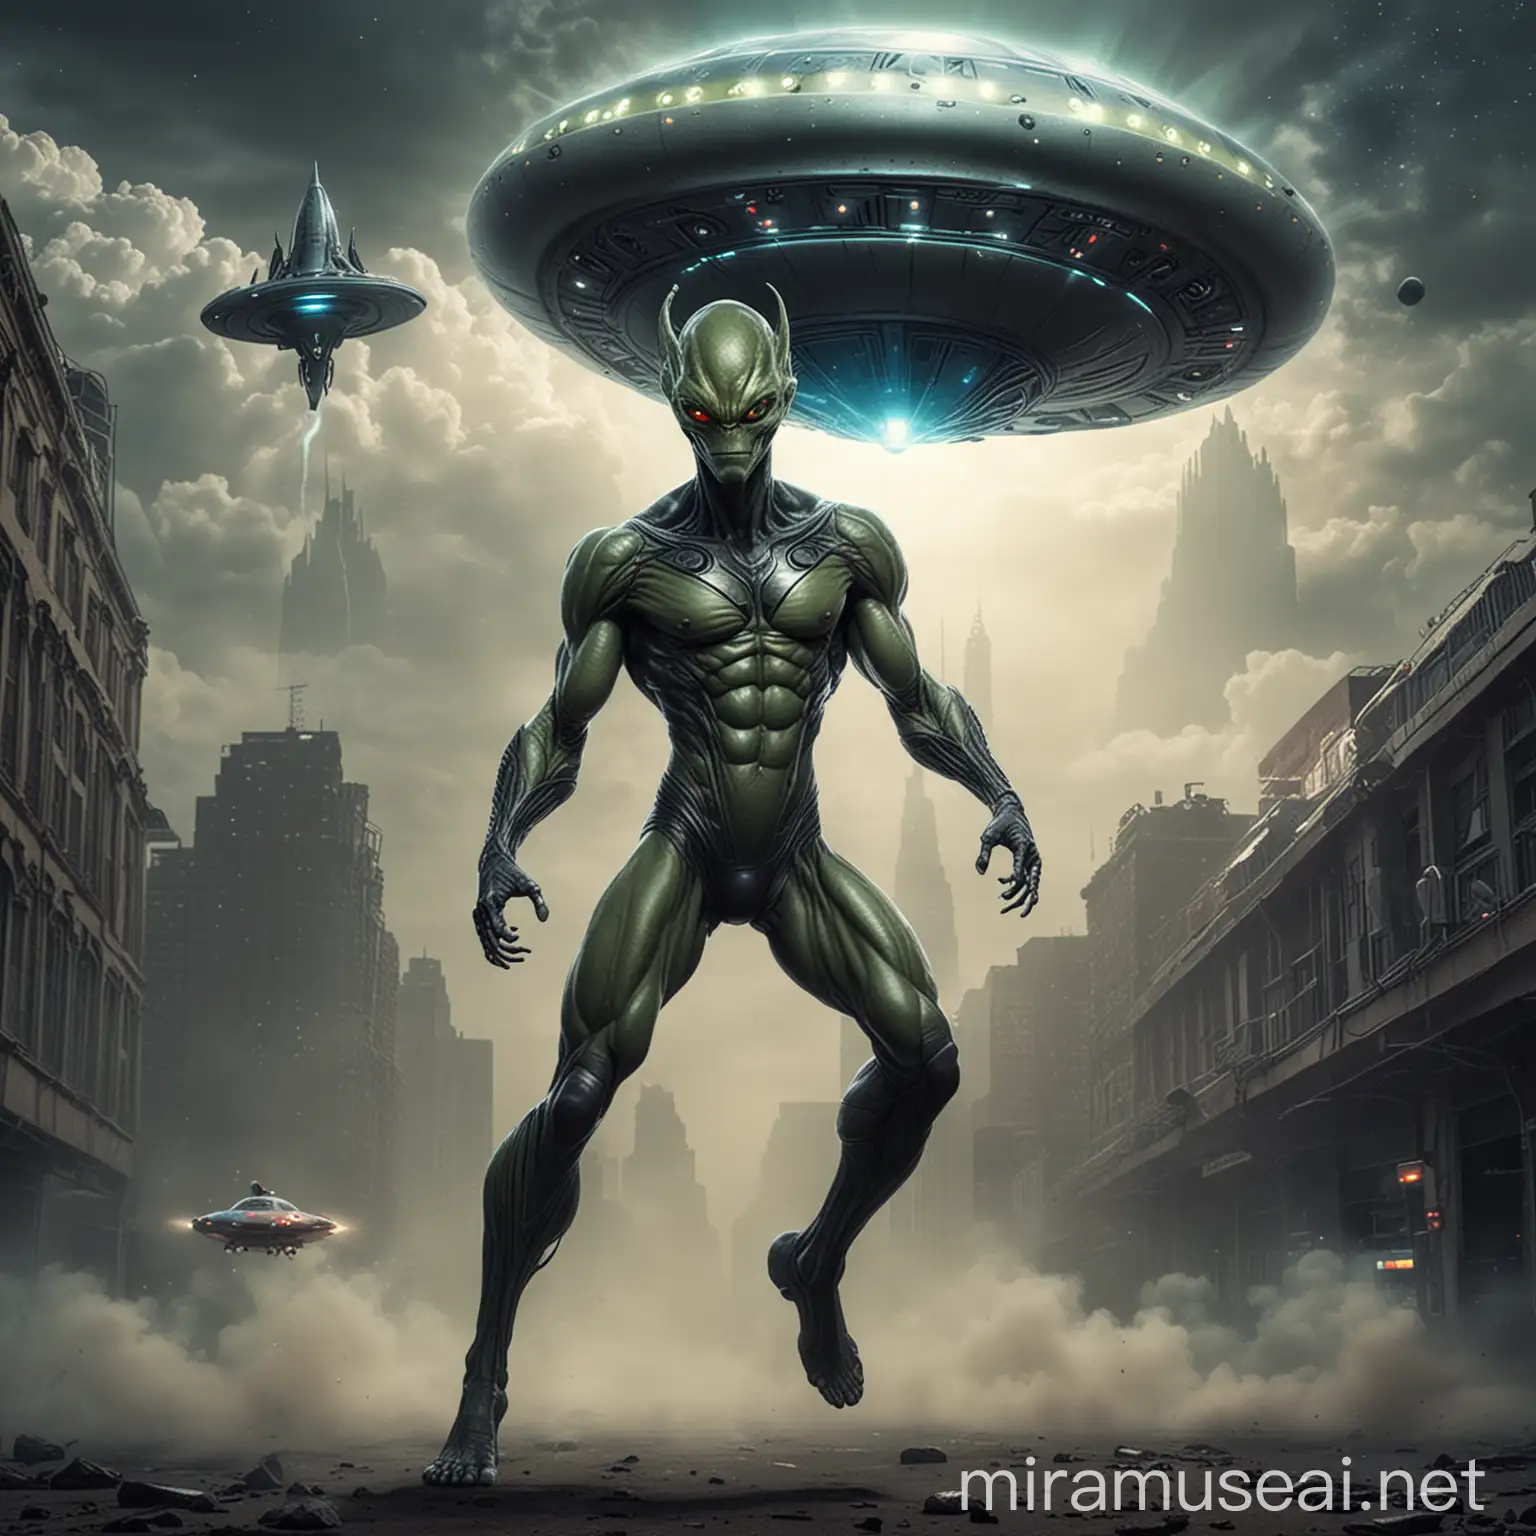 Powerful Superhero Alien Conquers Skies with UFO